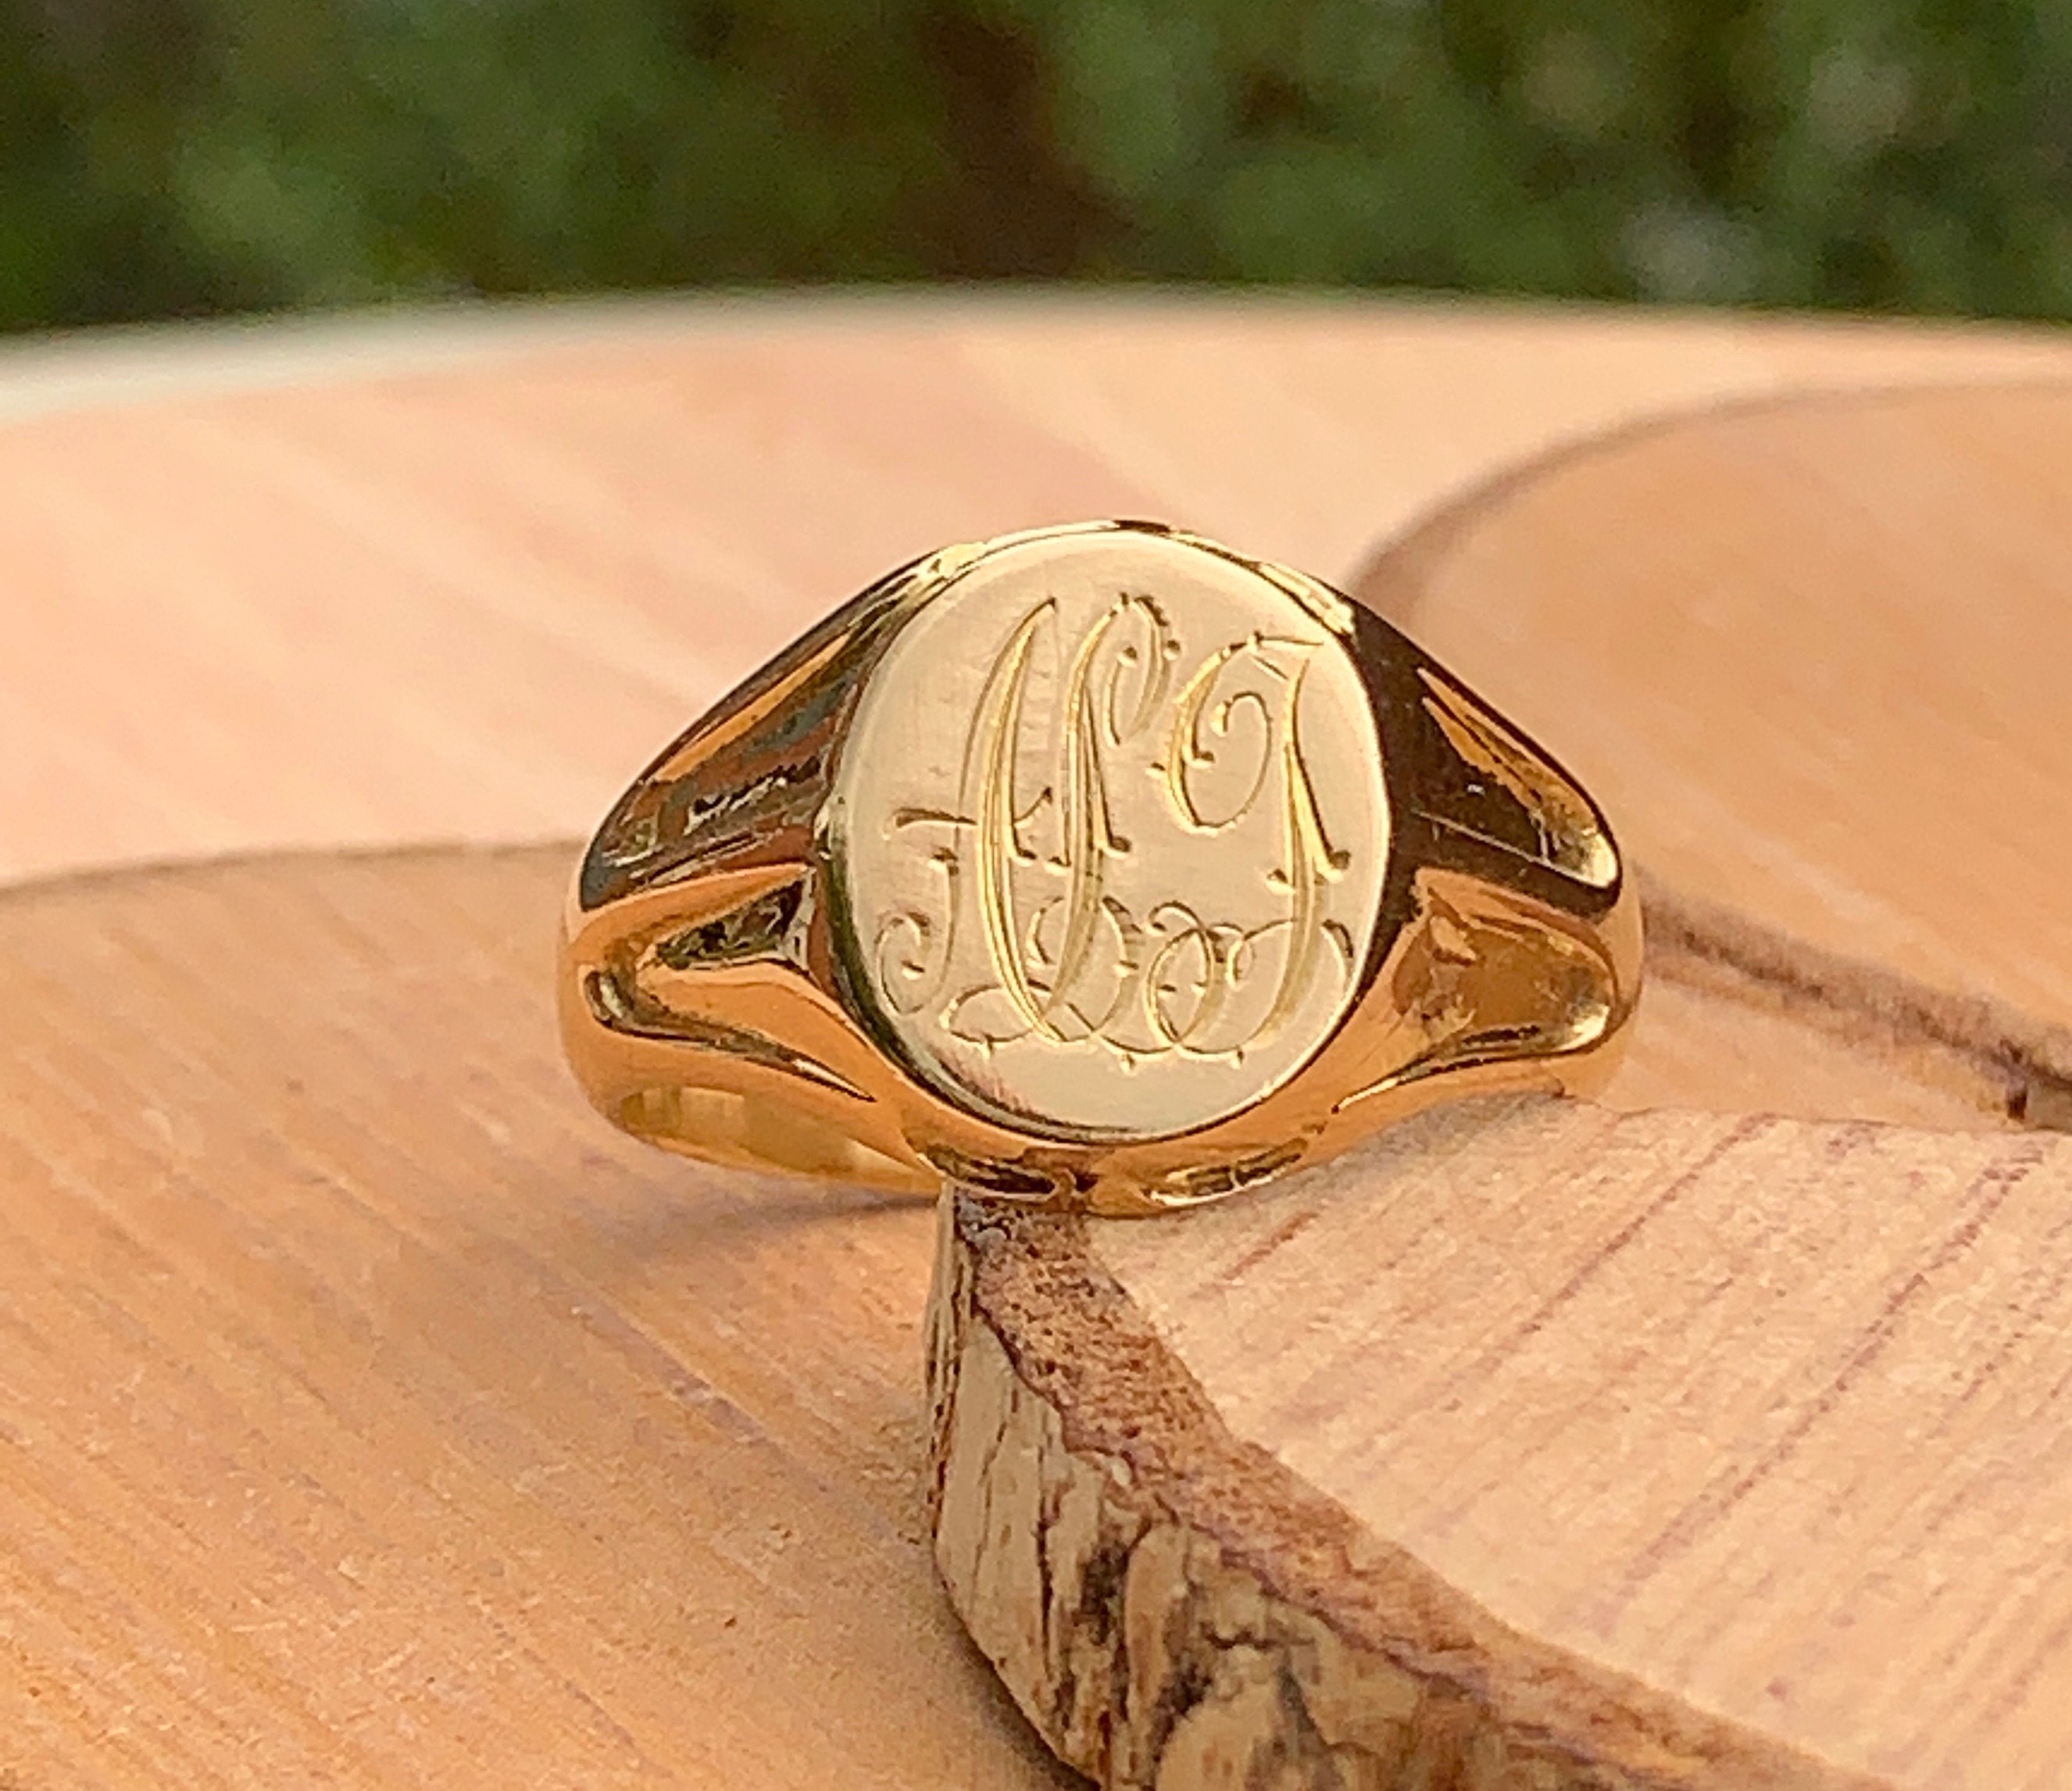  Gold  signet ring  Antique heavy big size 100 year old 18K 